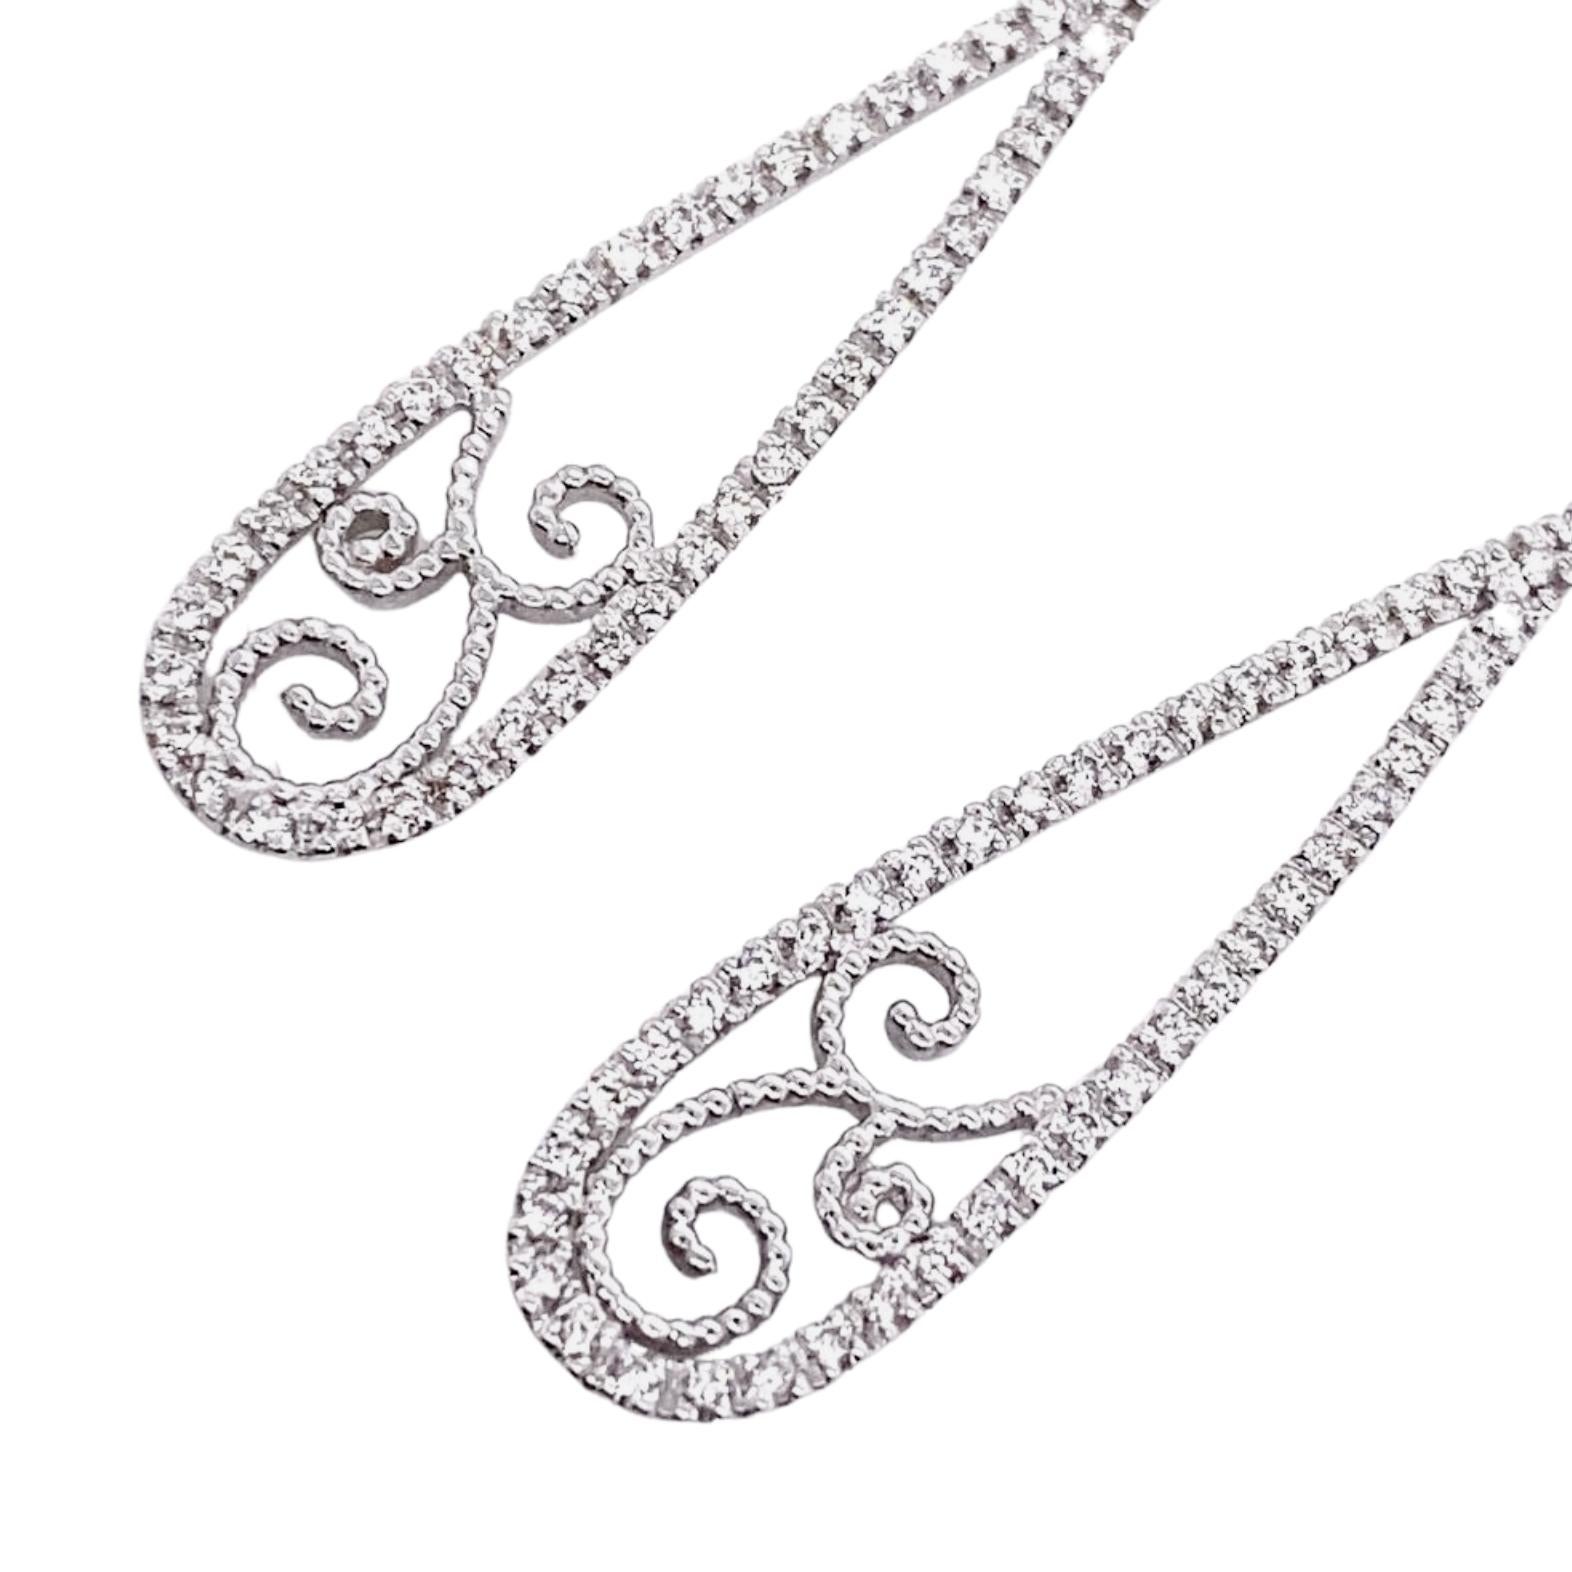 A charming pair of 18-karat white gold and F/G-VVS diamond earrings masterfully created by hand. 

The earrings fasten with an elegant French clip and post. They weigh about 4.7 grams and measure approximately 5 centimetres long. 

Are you looking